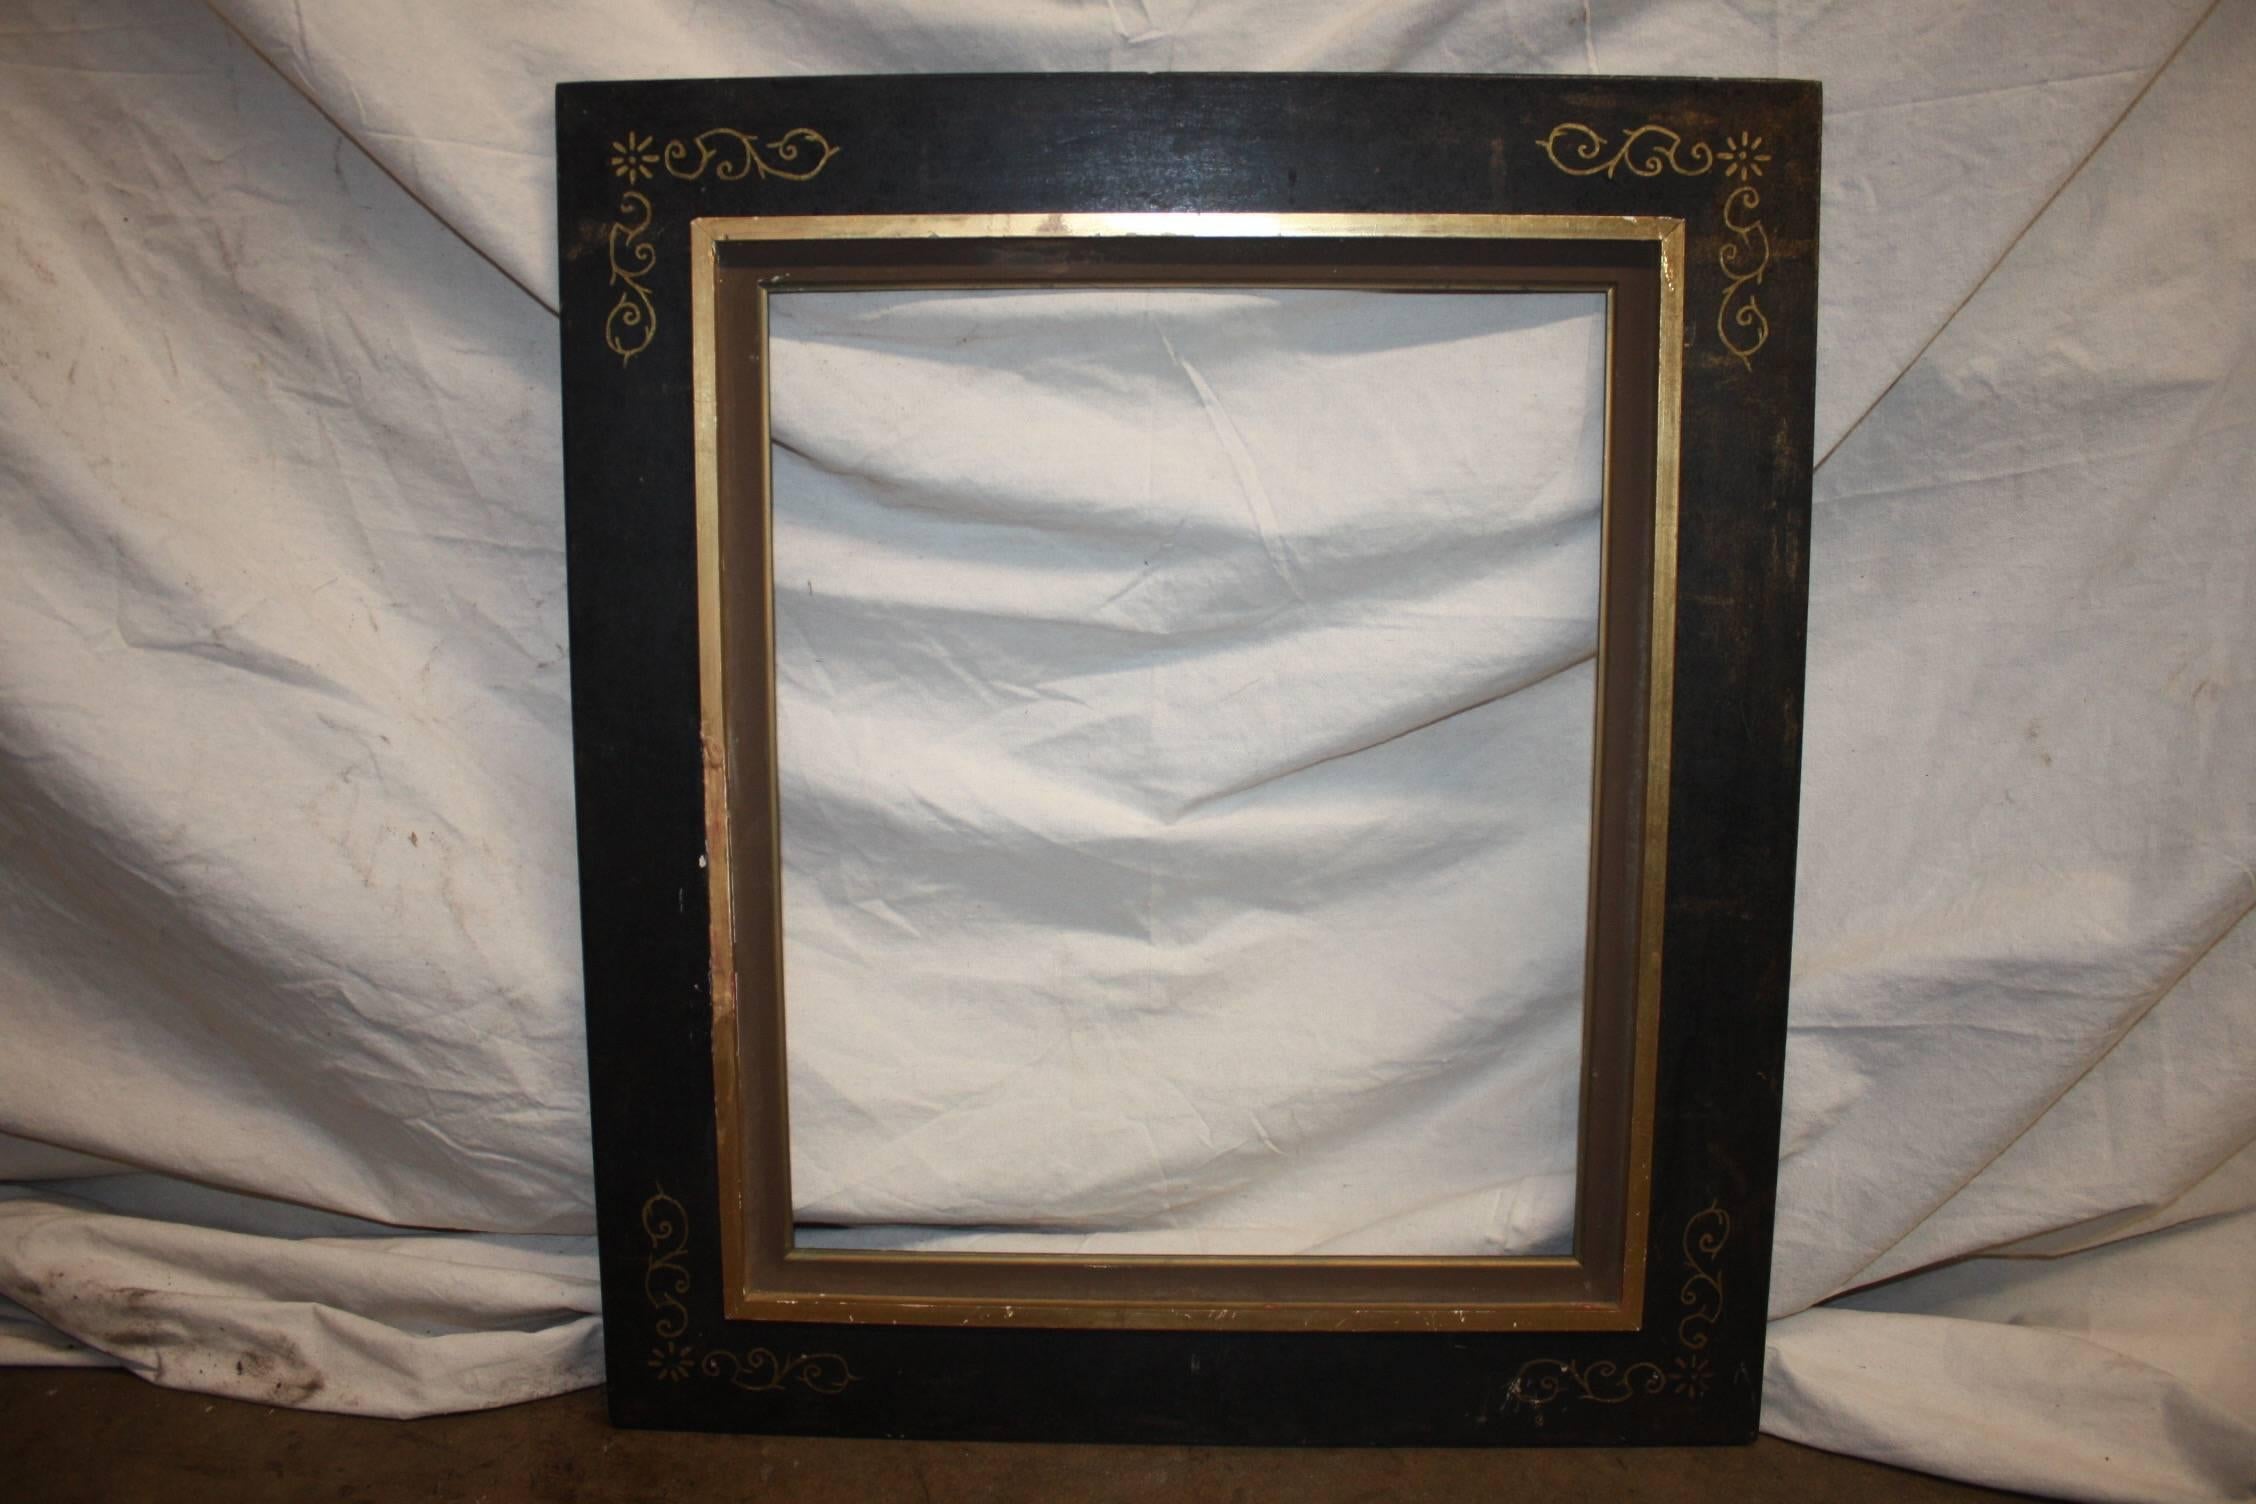 Early 20th century French frame.